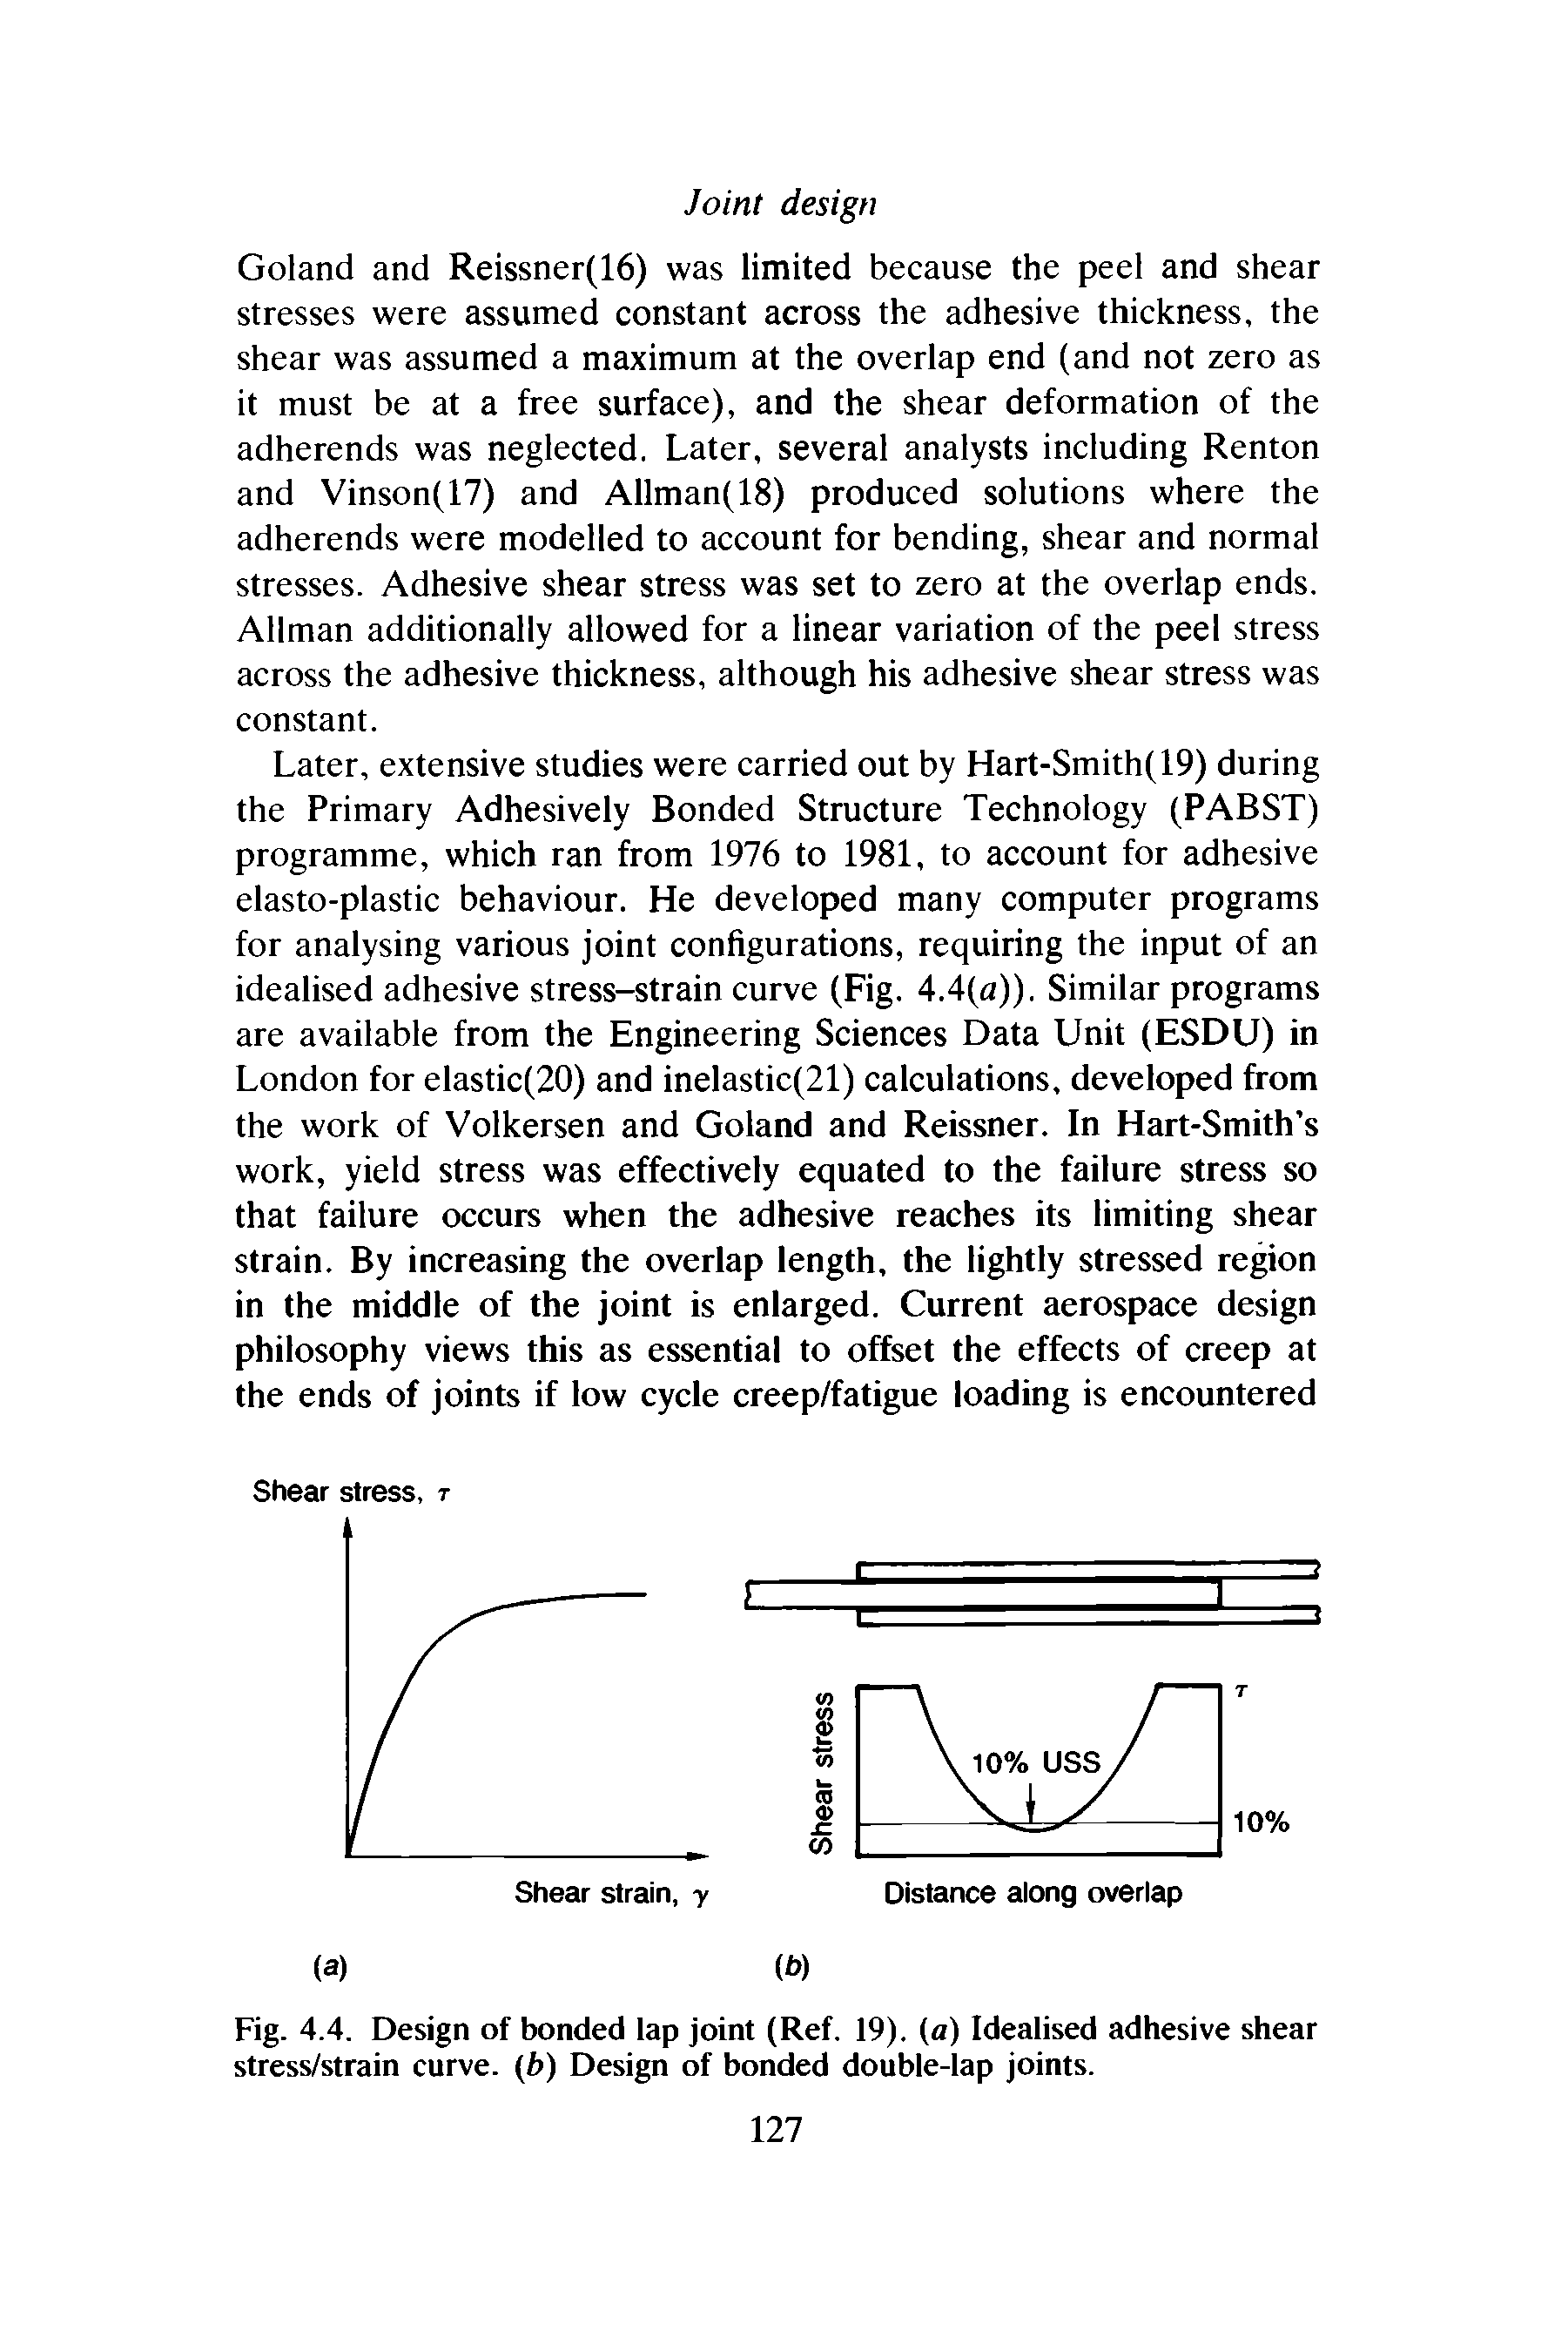 Fig. 4.4. Design of bonded lap joint (Ref. 19). (a) Idealised adhesive shear stress/strain curve. (f>) Design of bonded double-lap joints.